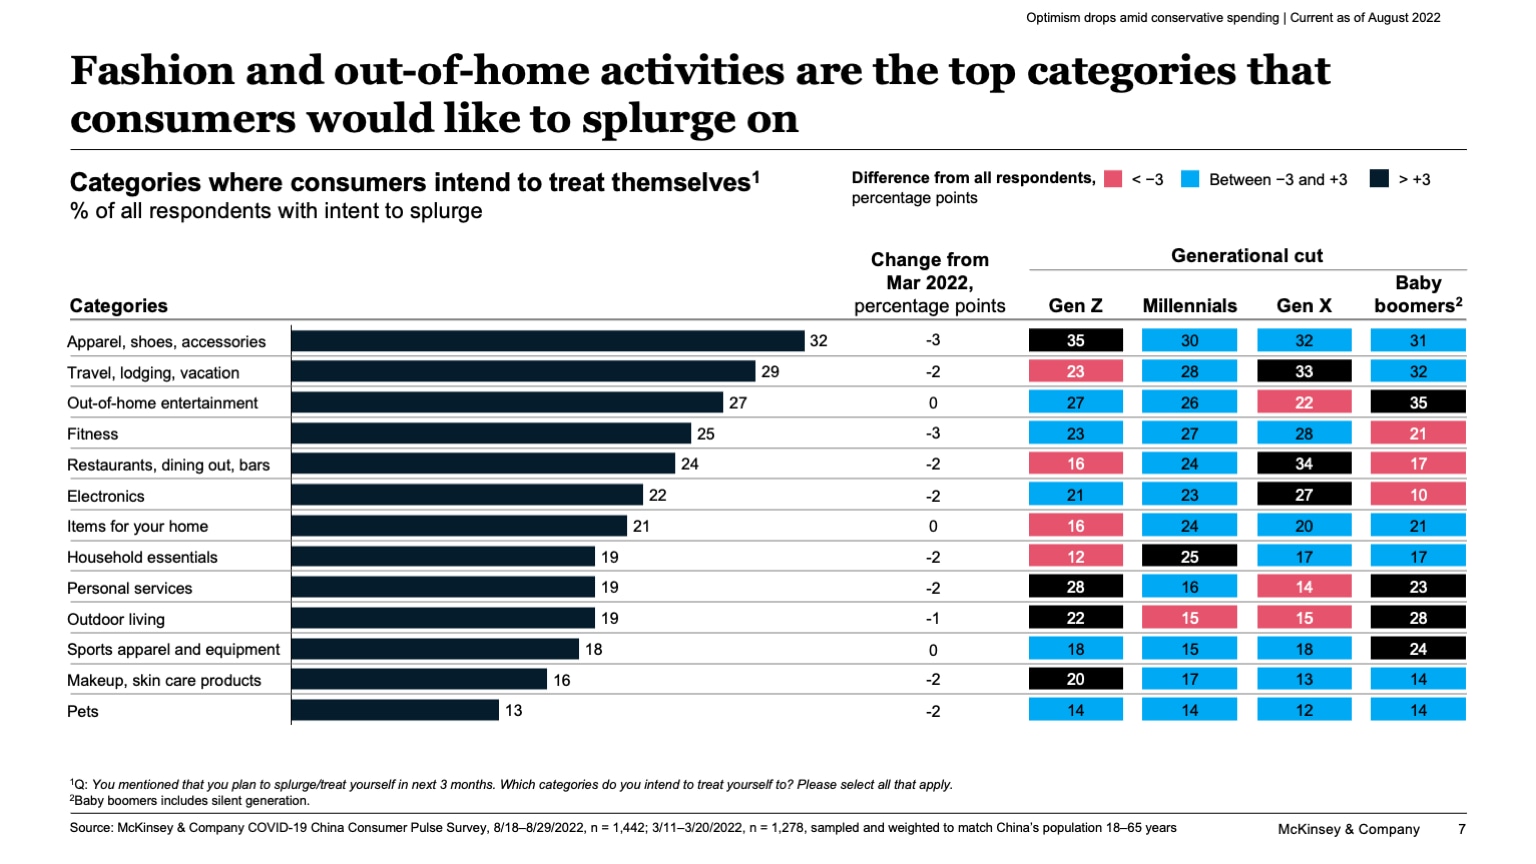 Fashion and out-of-home activities are the top categories that consumers would like to splurge on